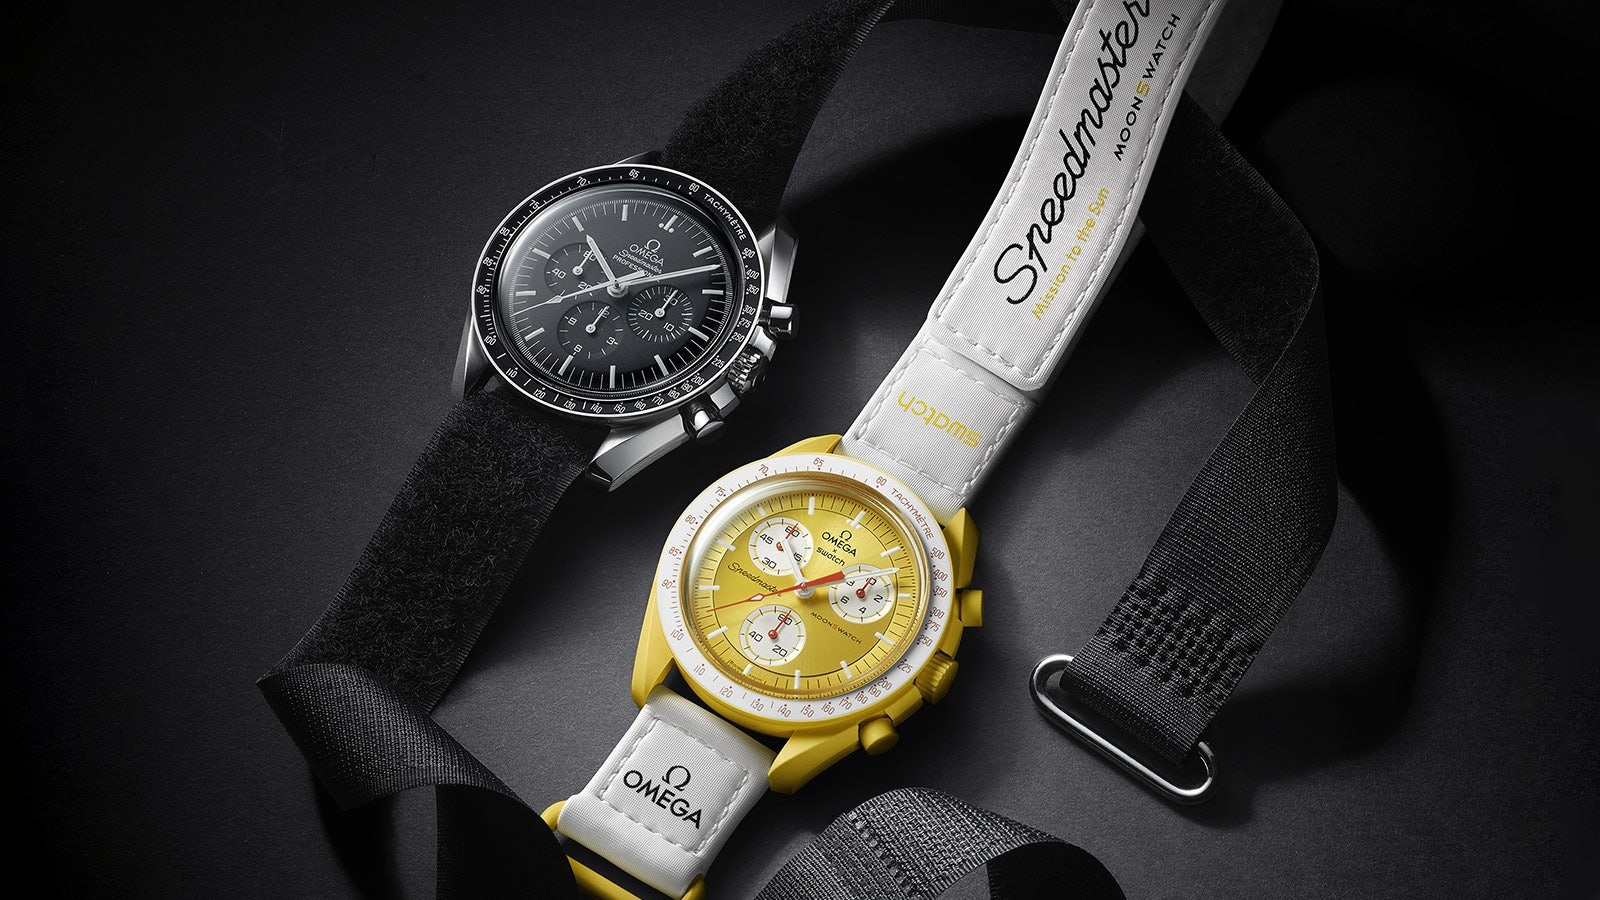 The first Swatch x Omega collaboration has caused chaos worldwide, reselling for more than 10 times its original value. But in China, reactions were muted. Why? Photo: Swatch Group